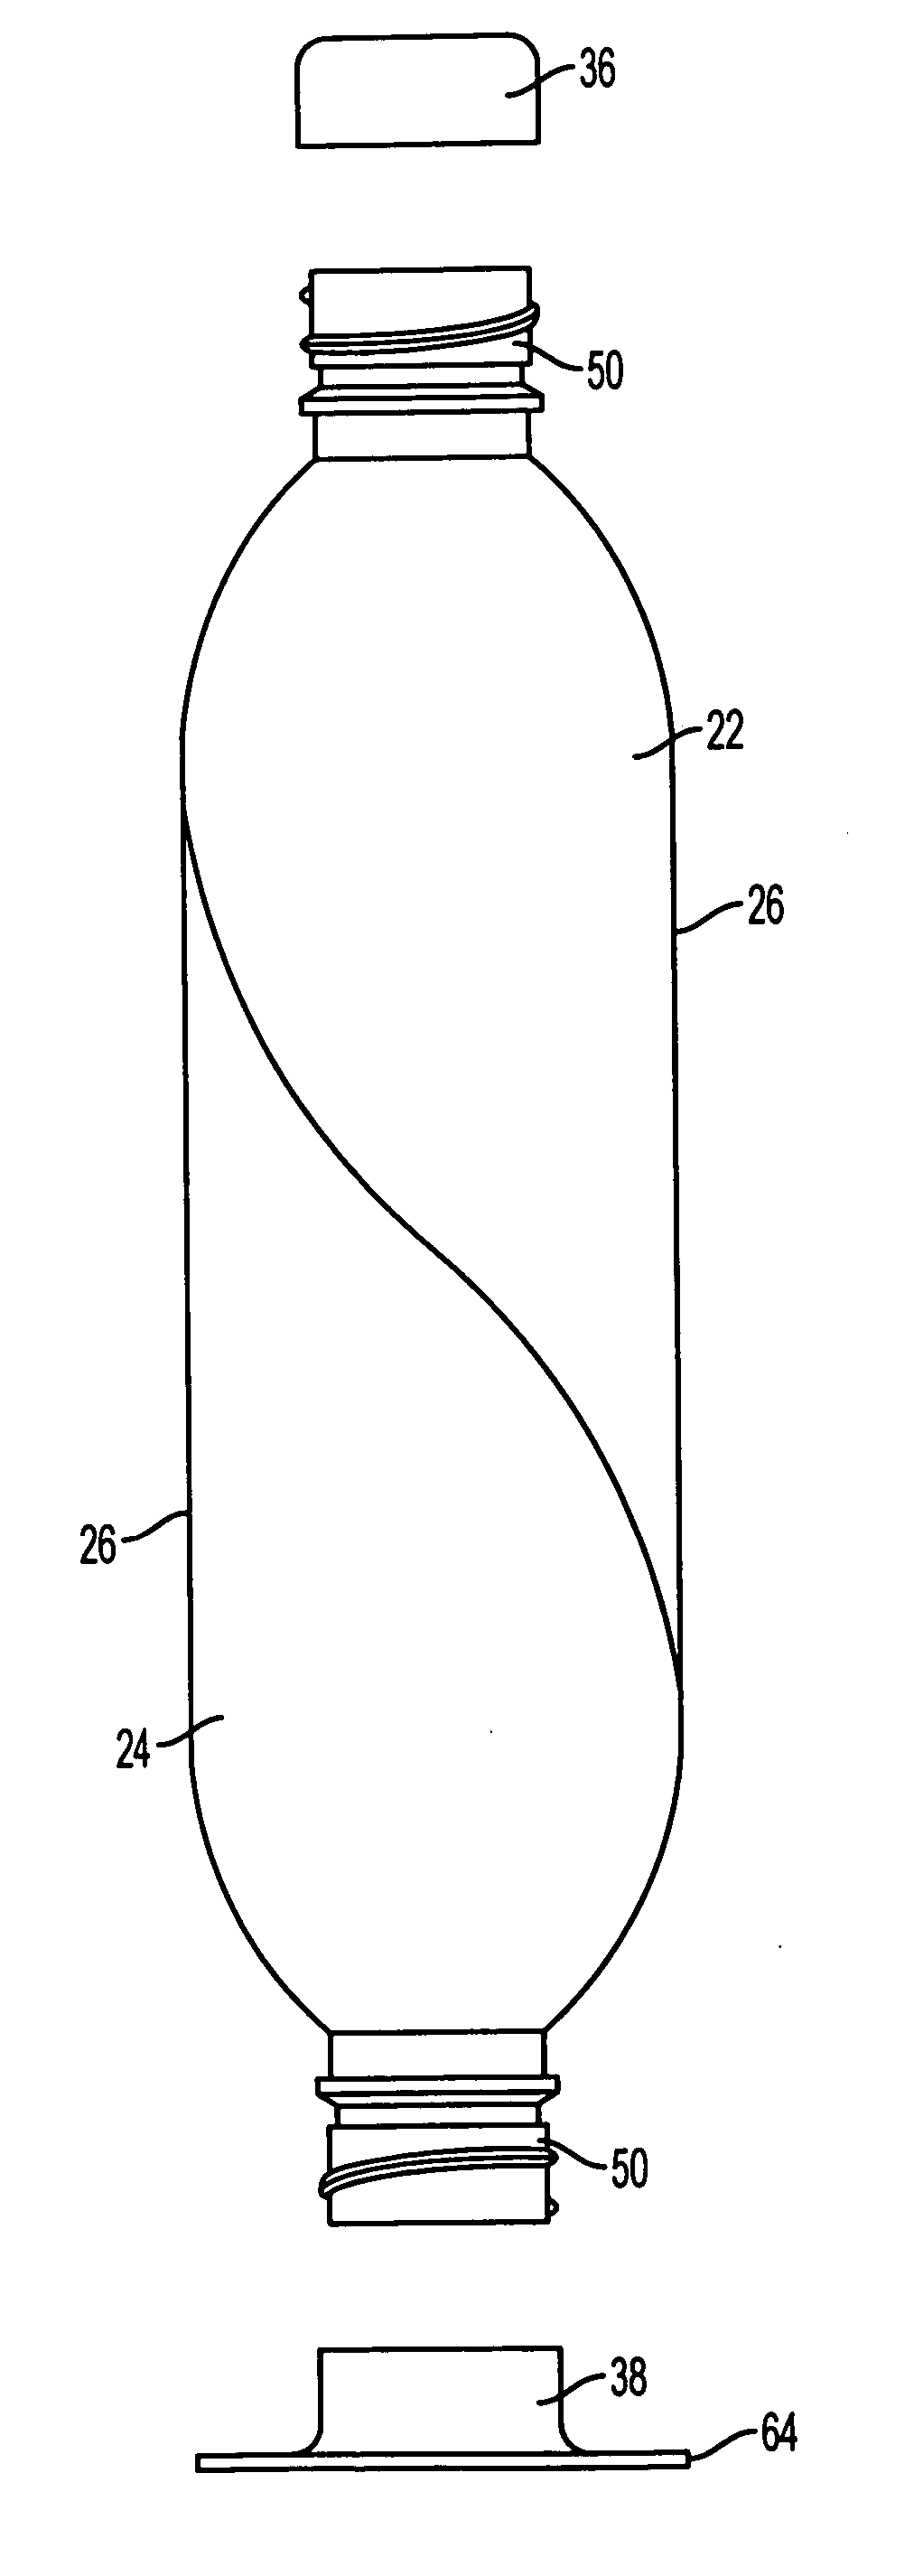 Multiple cavity bottle and method of manufacturing same